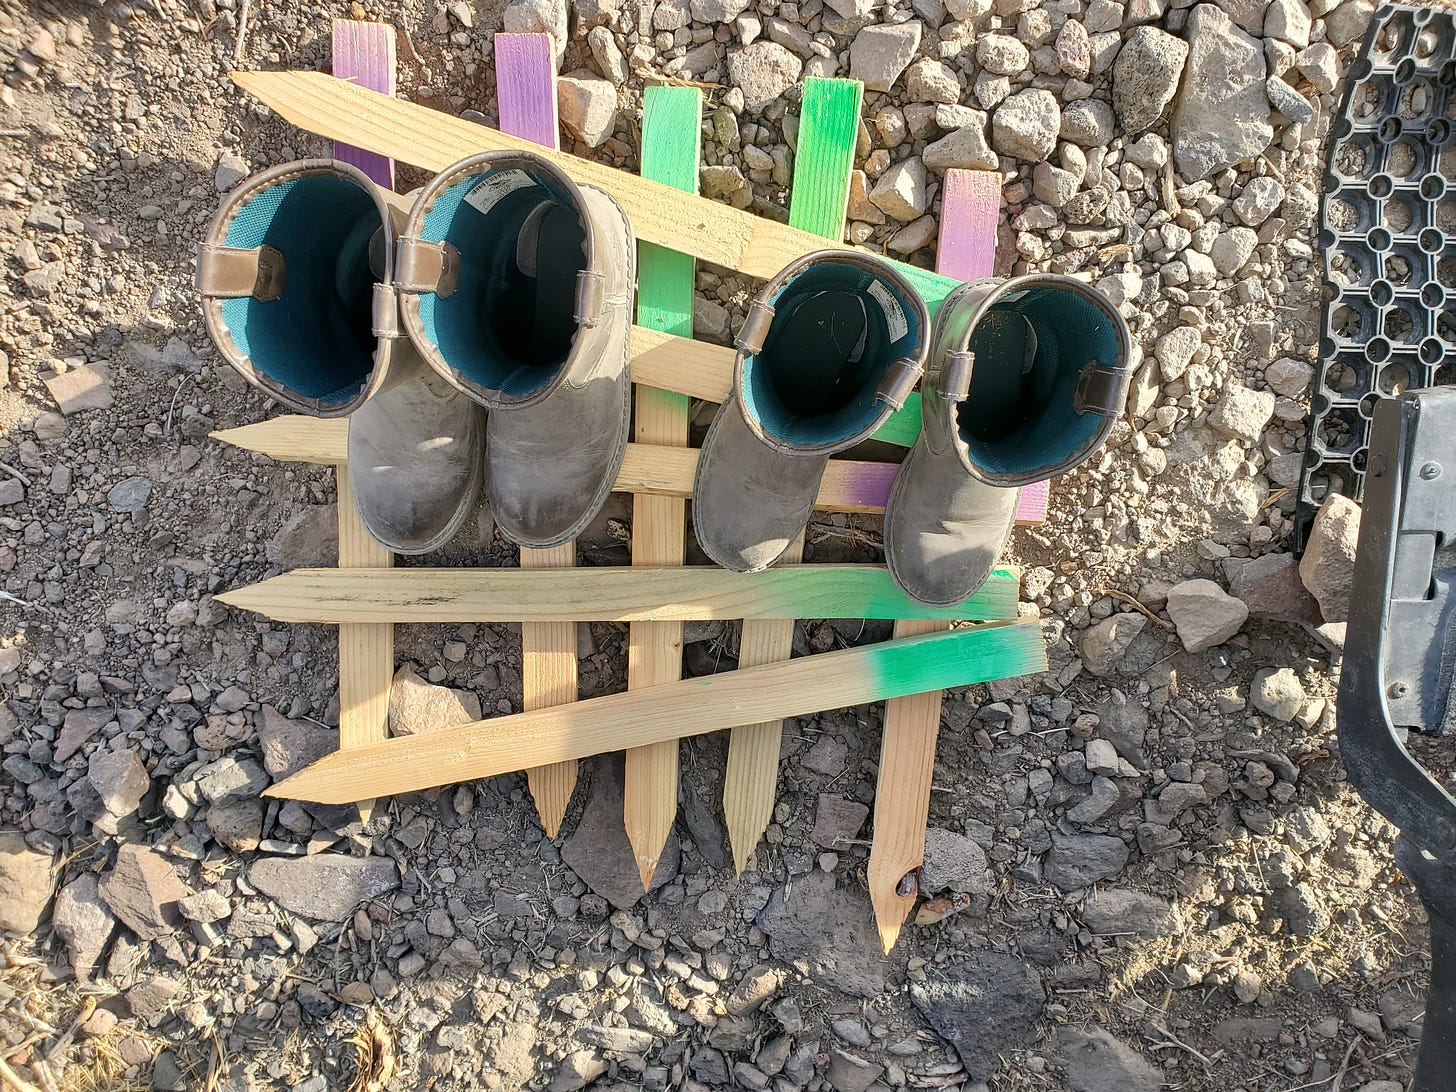 Two sets of dusty children's work boots on crisscrossed wooden stakes on the ground.